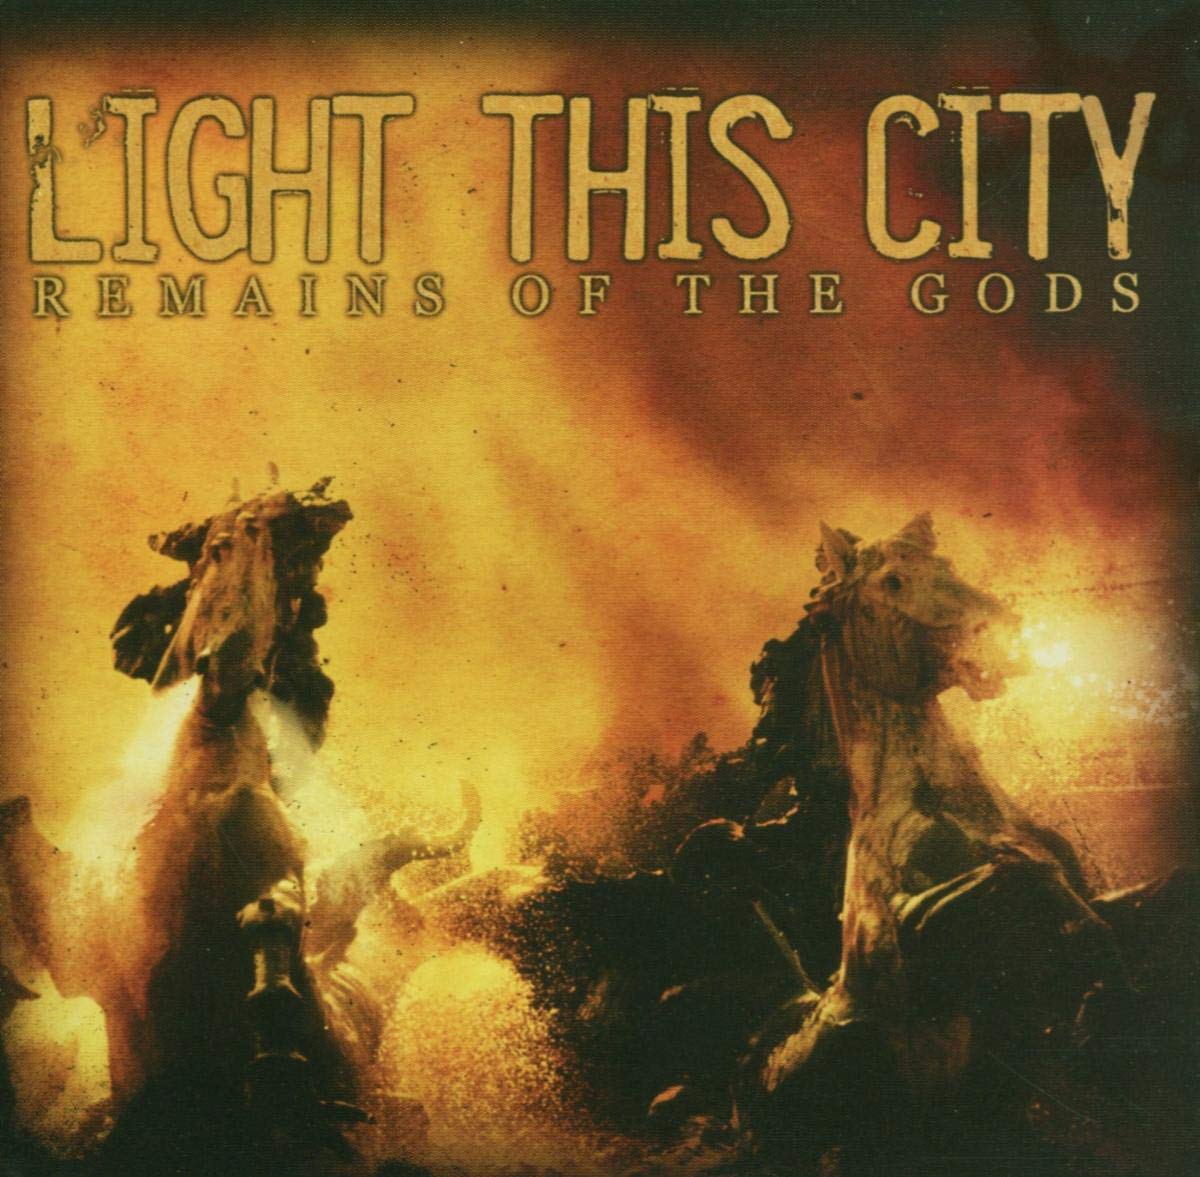 Art for Remains of the Gods by Light This City